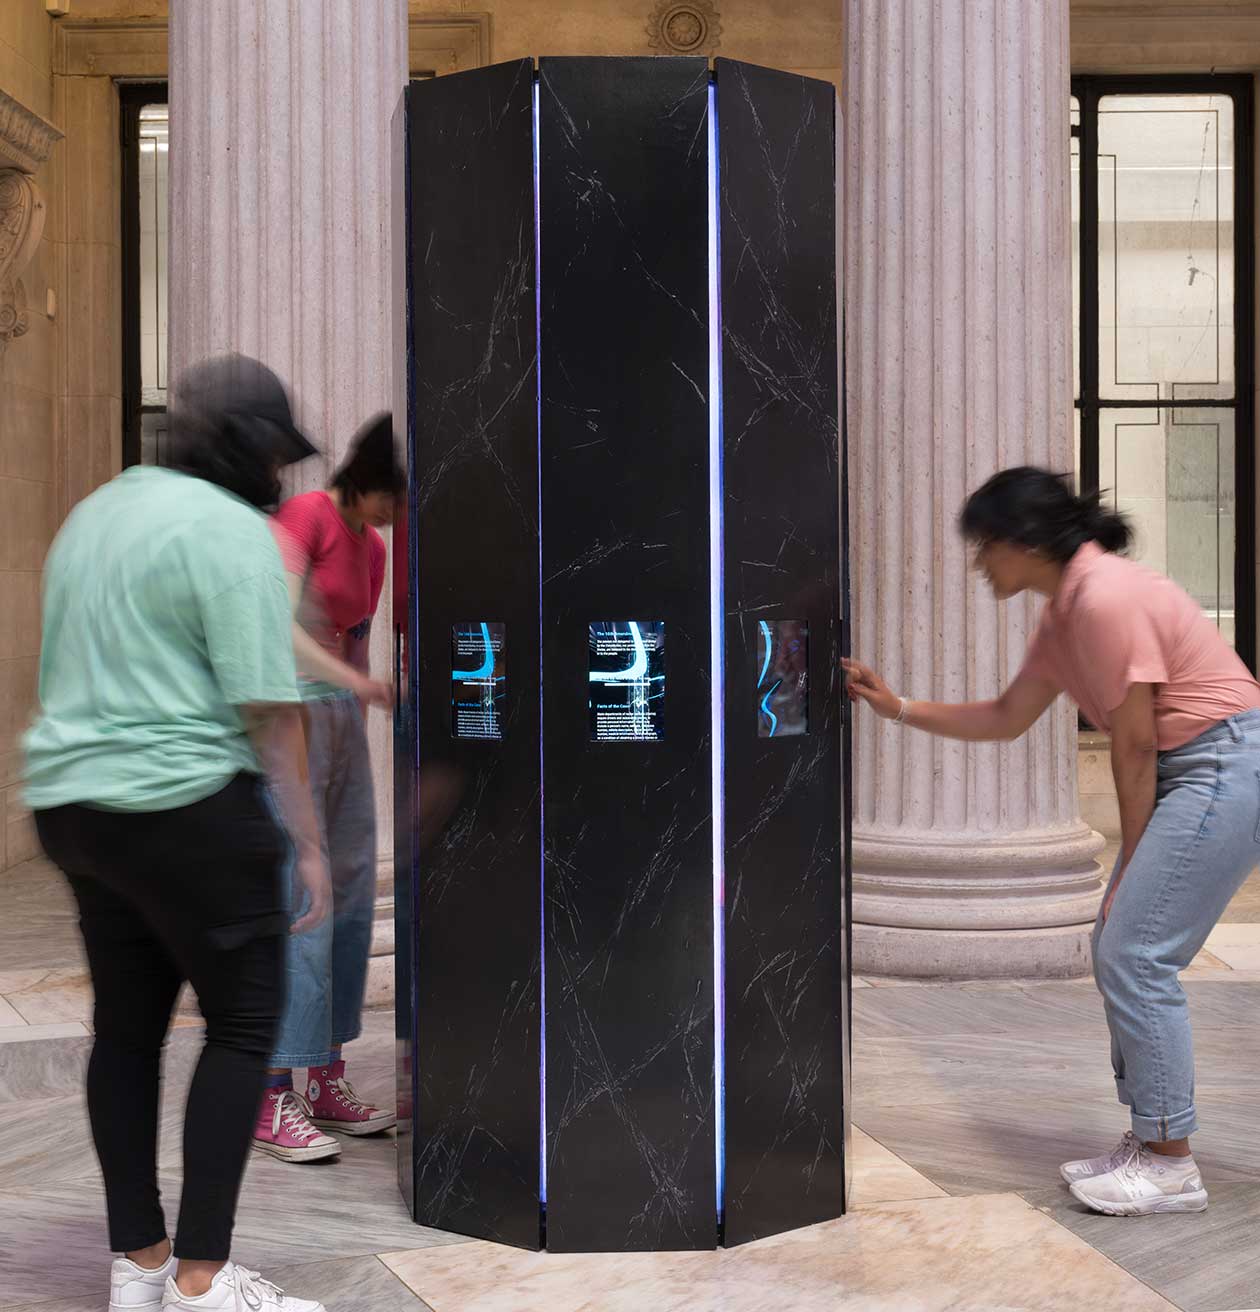 Three people interact with the artwork, v.erses. The work is composed of a 9-sided column in which tablet screens are embedded